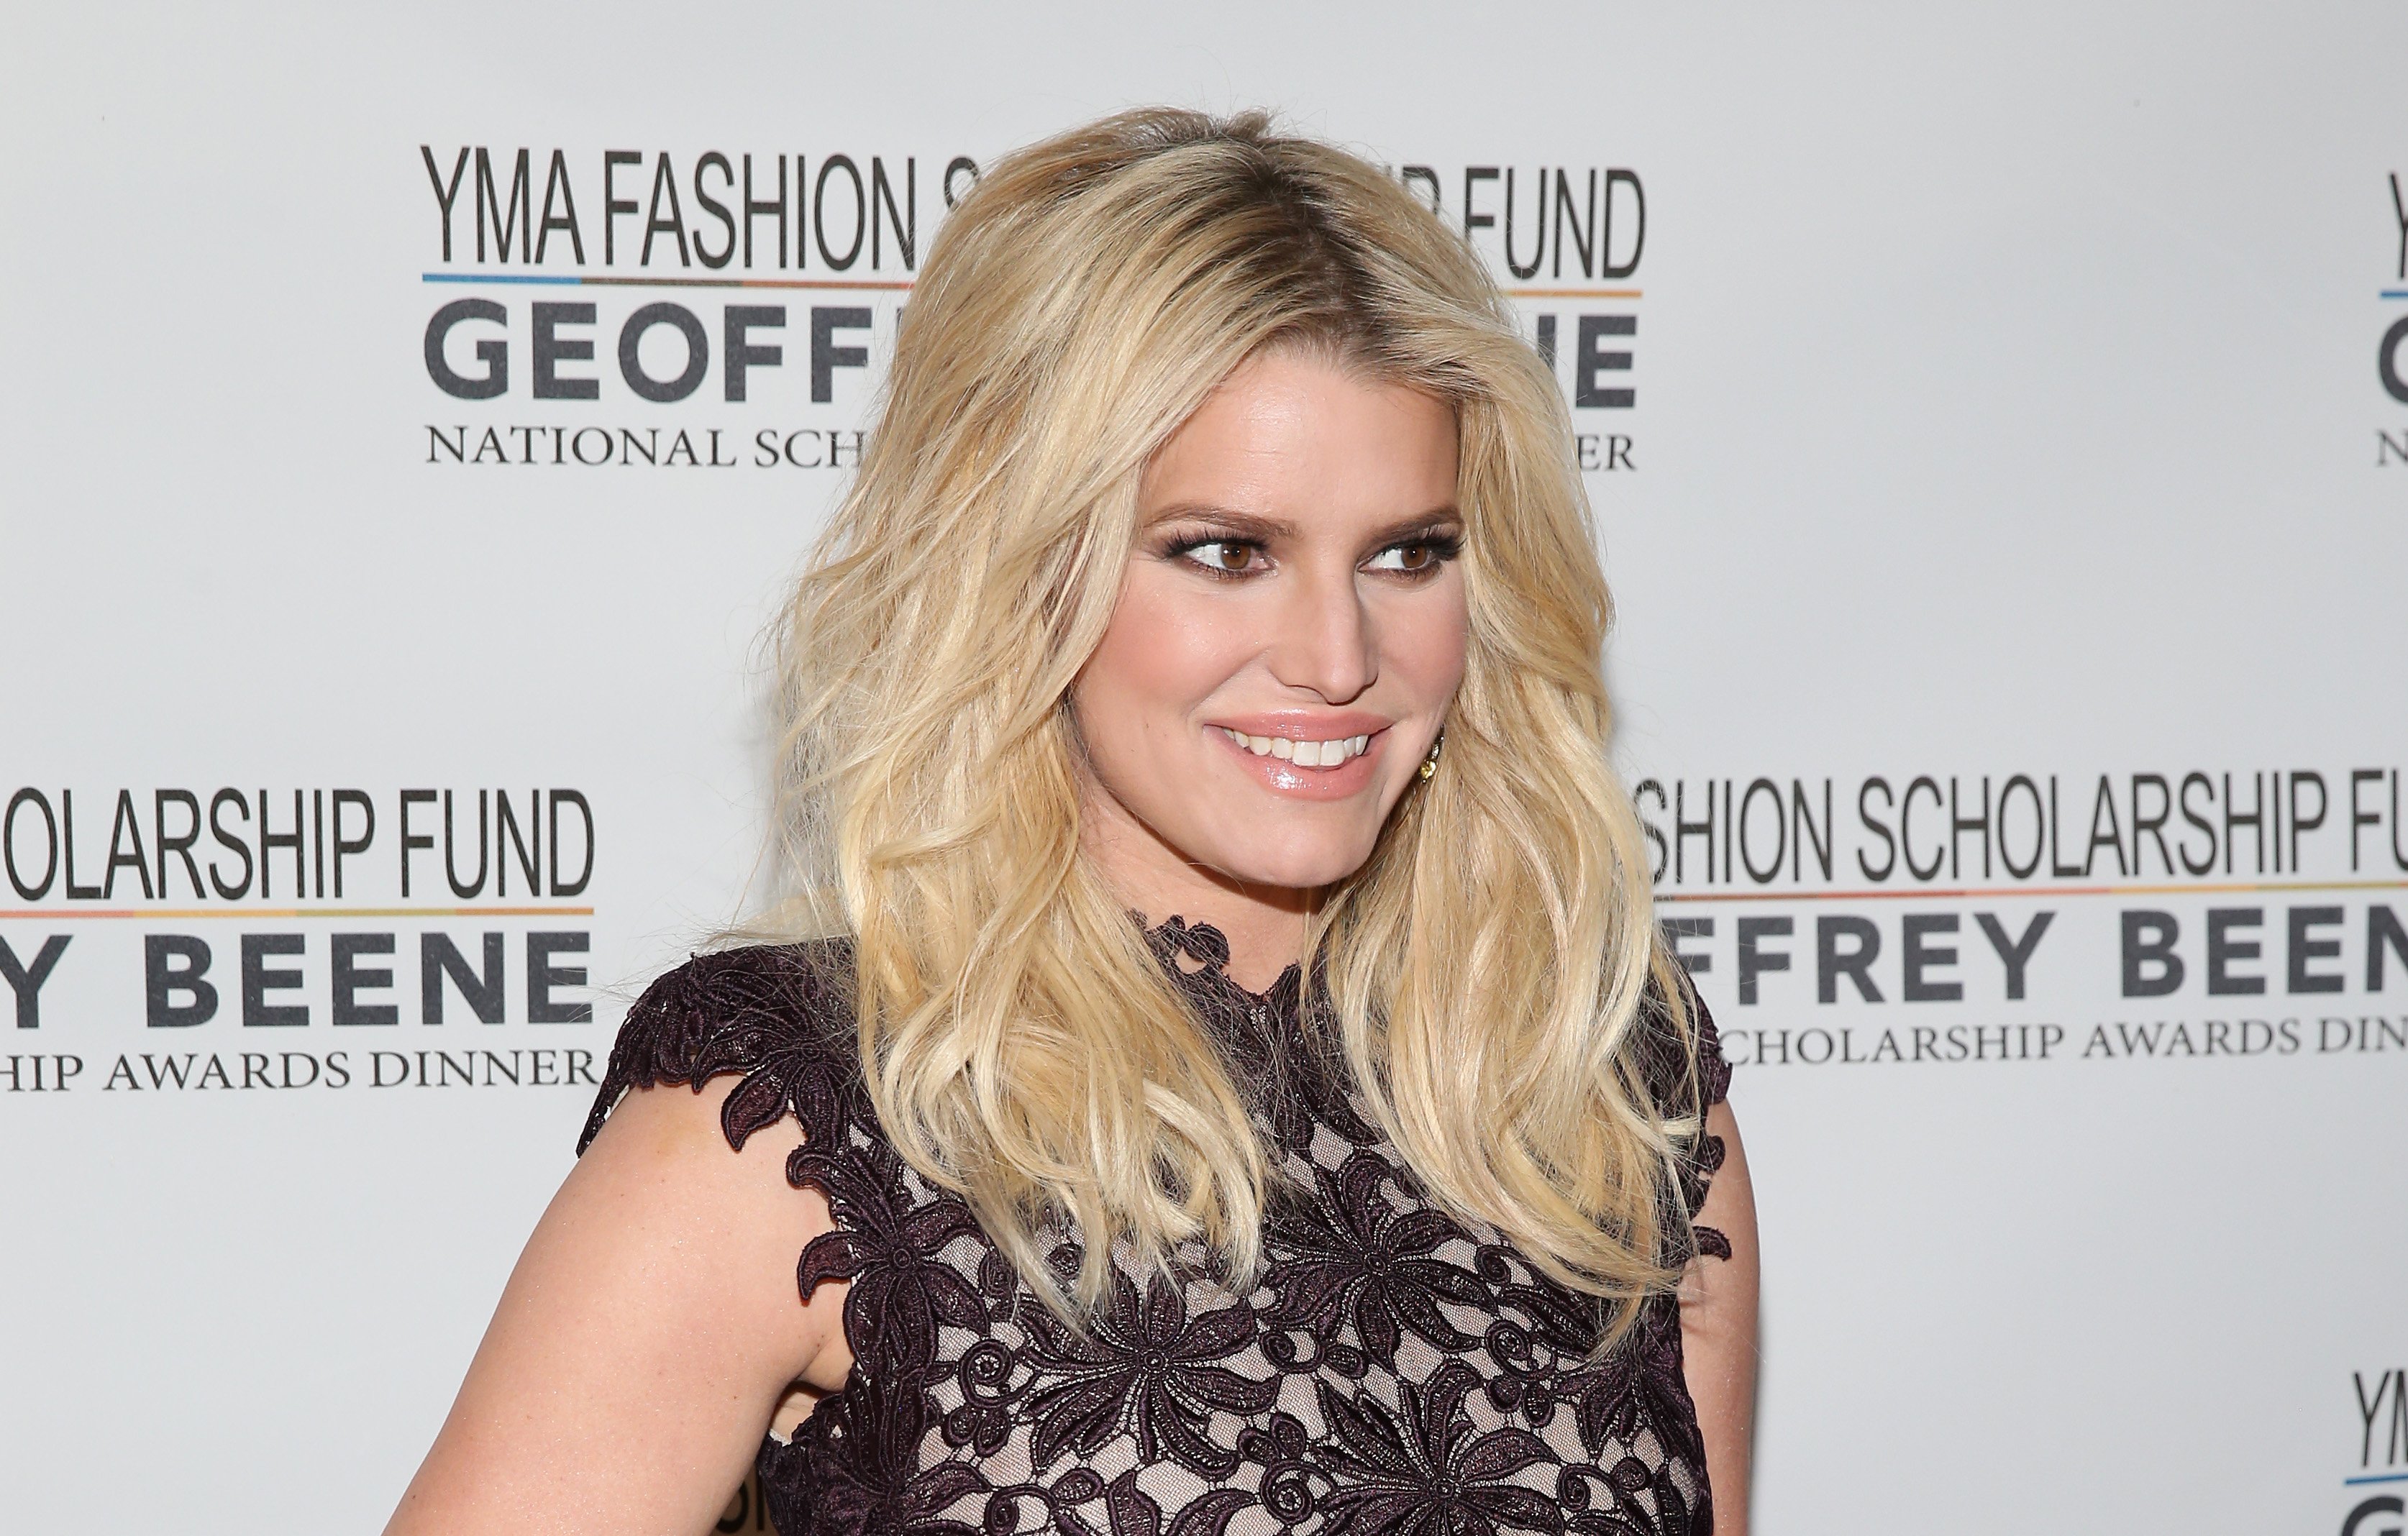 Jessica Simpson pictured at the YMA Fashion Scholarship Fund Geoffrey Beene National Scholarship Awards Gala, 2016, New York City. | Photo: Getty Images